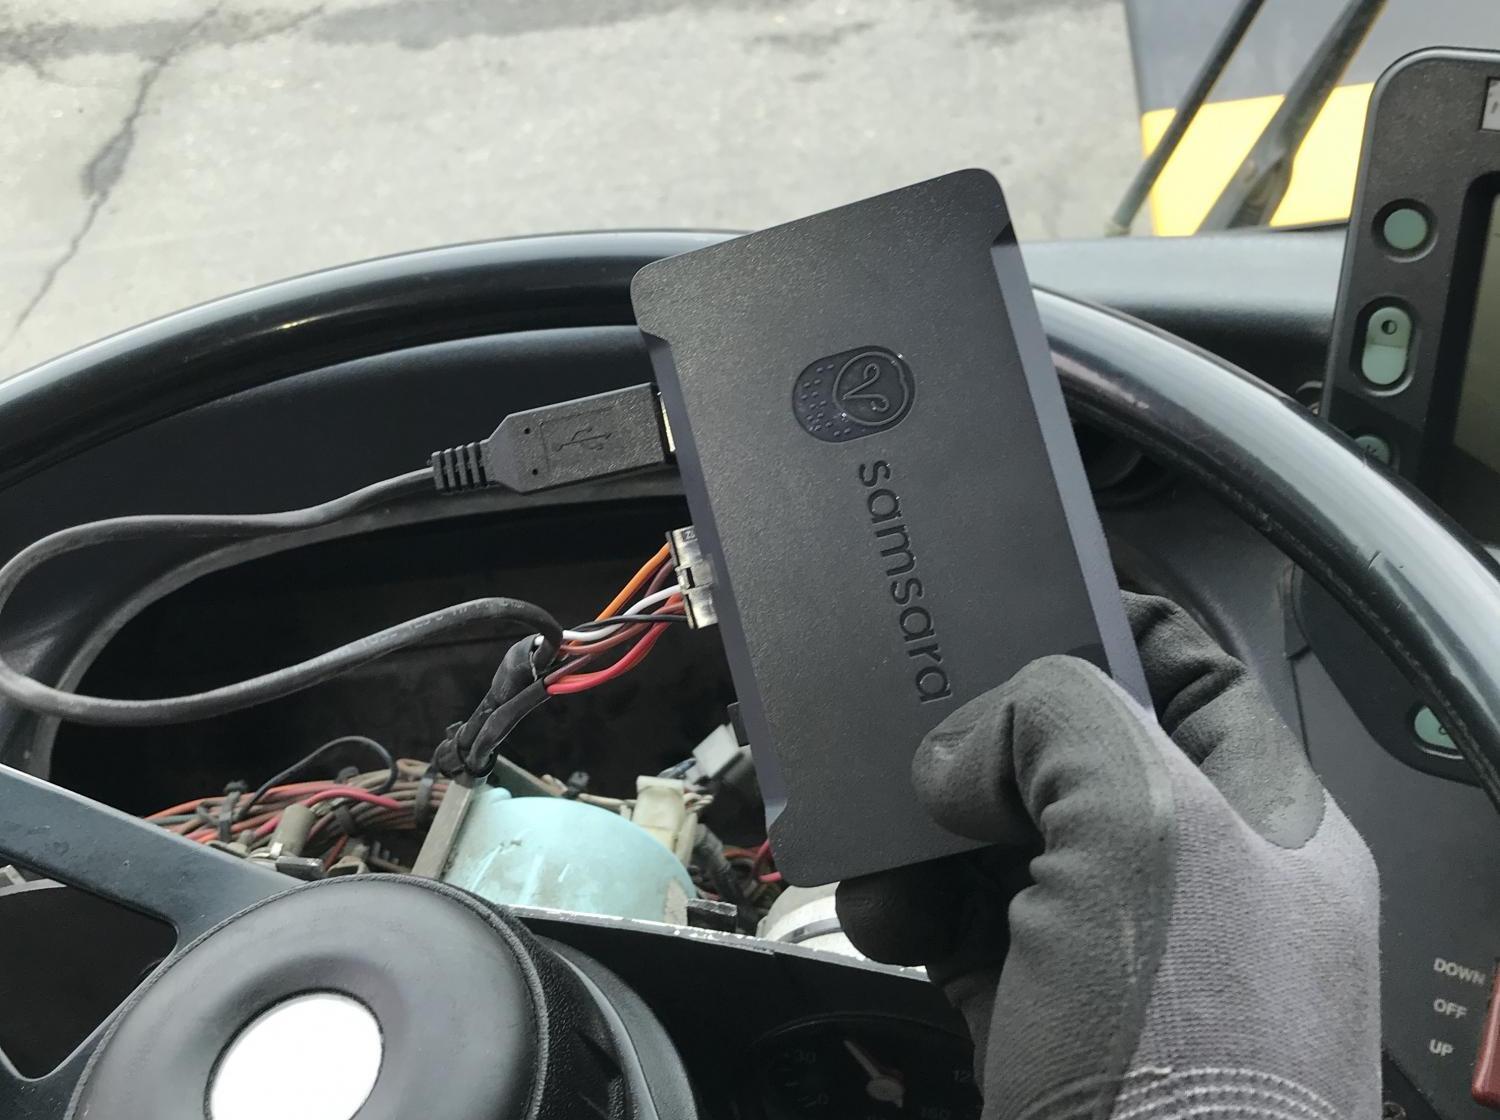 Closeup of a Samsara GPS device, held by a gloved driver's hand in front of a bus steering wheel.